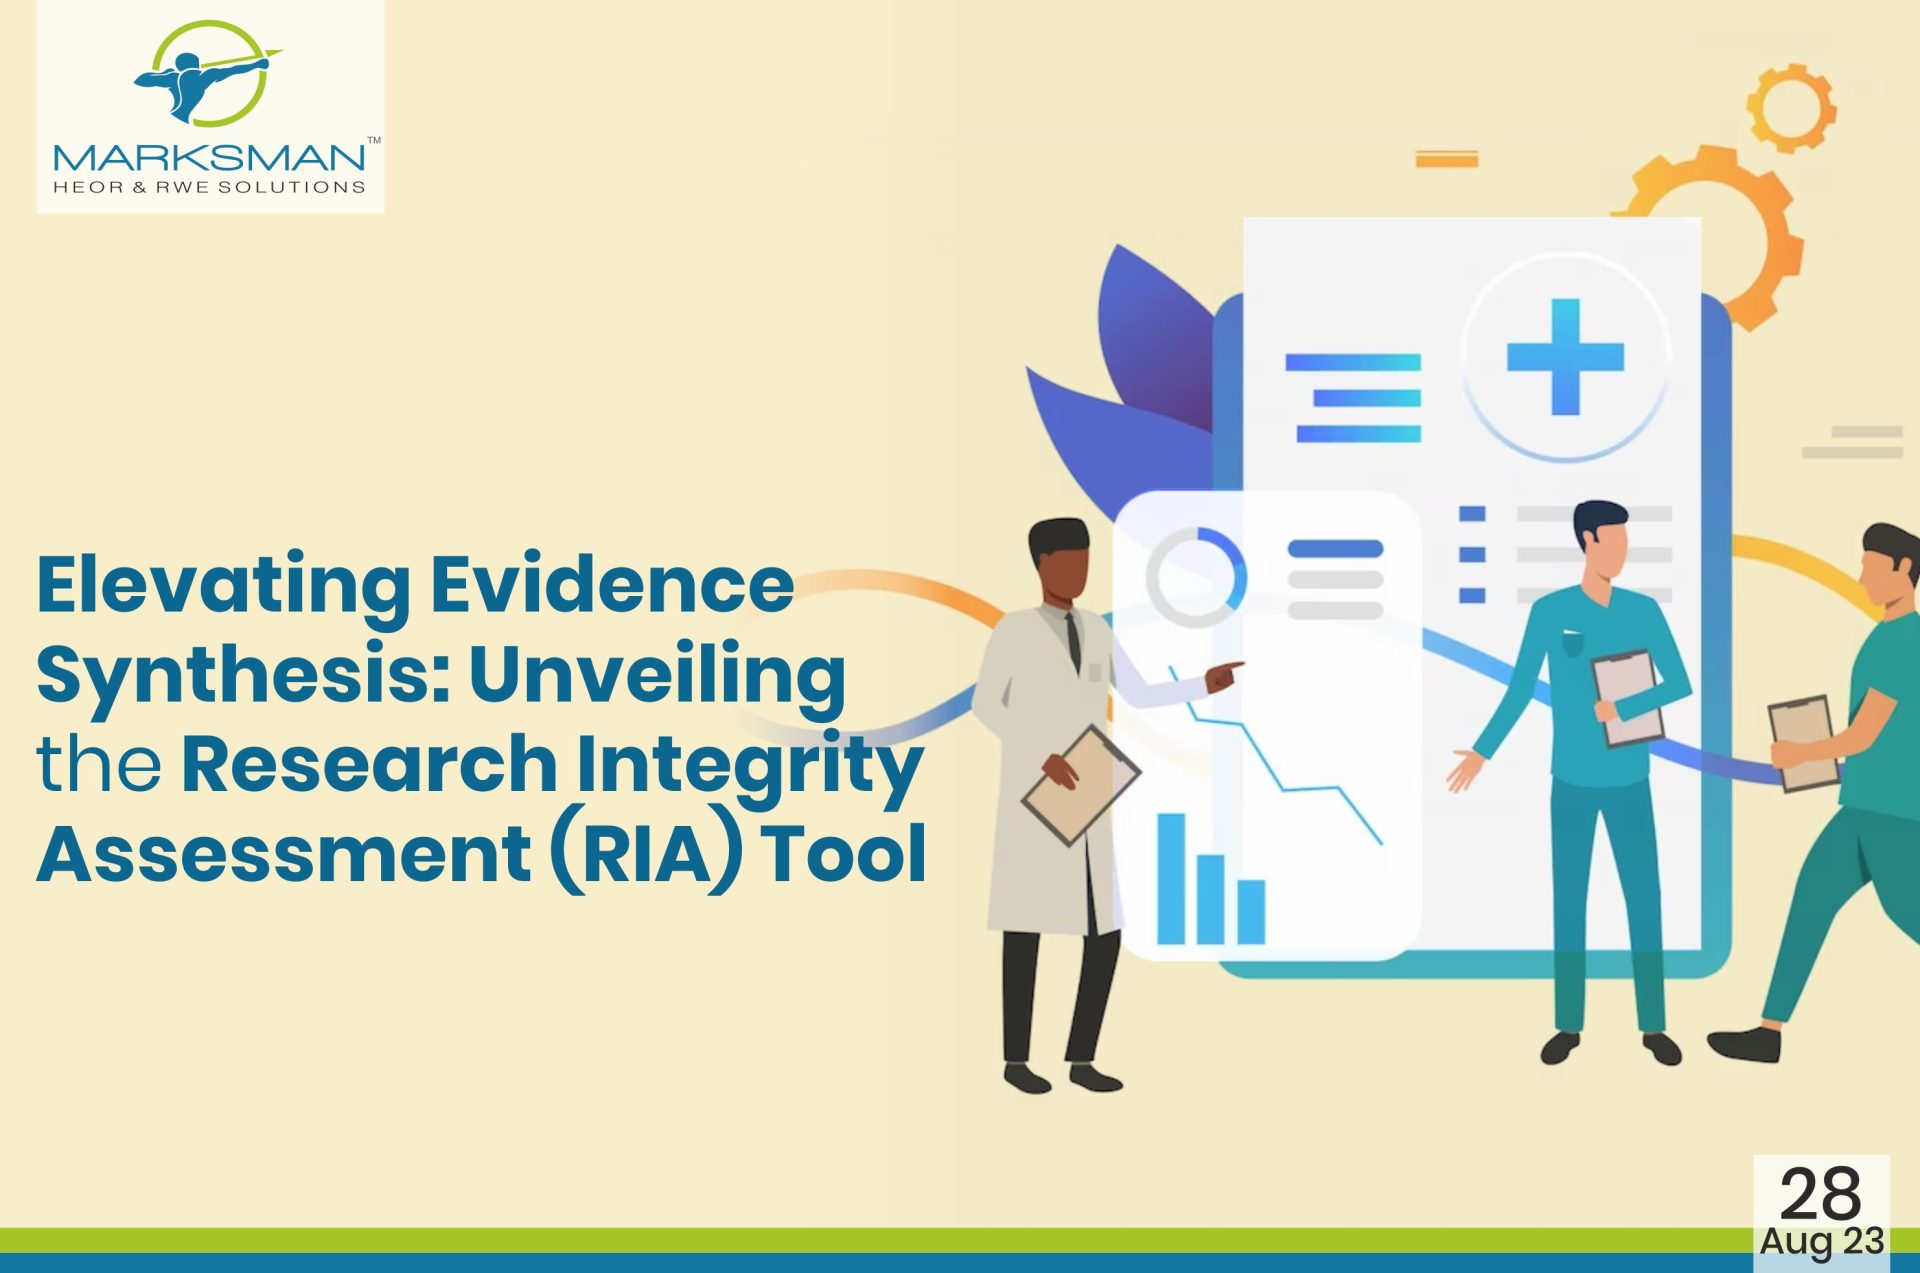 Research Integrity Assessment (RIA) Tool